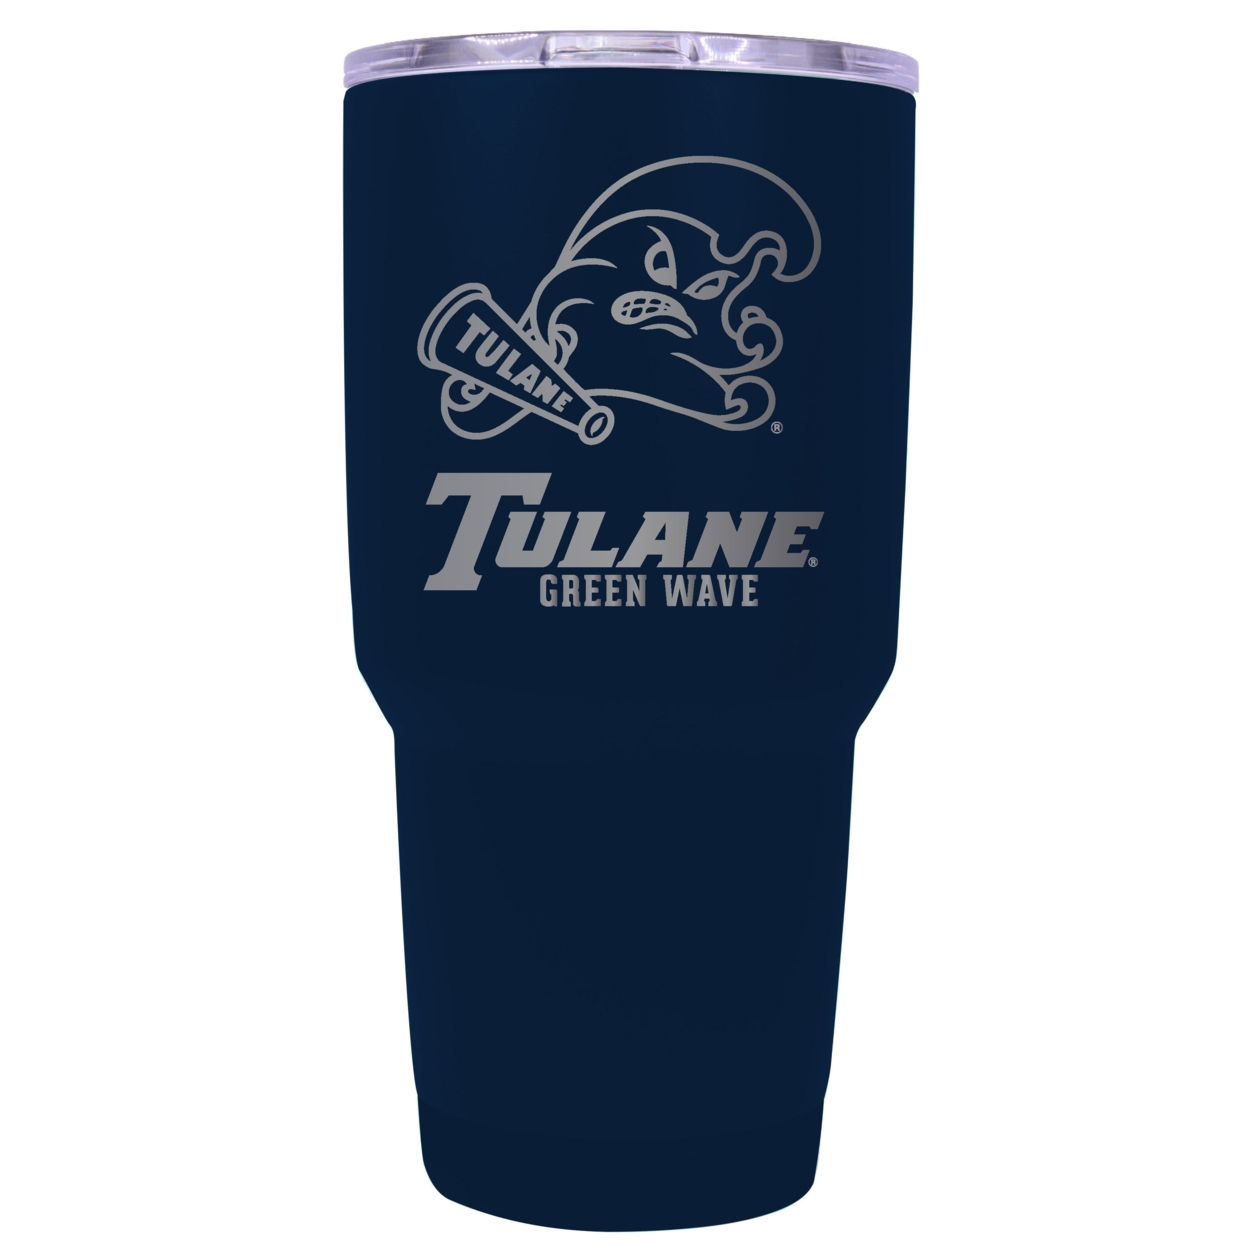 Tulane University Green Wave 24 Oz Laser Engraved Stainless Steel Insulated Tumbler - Choose Your Color. - Seafoam